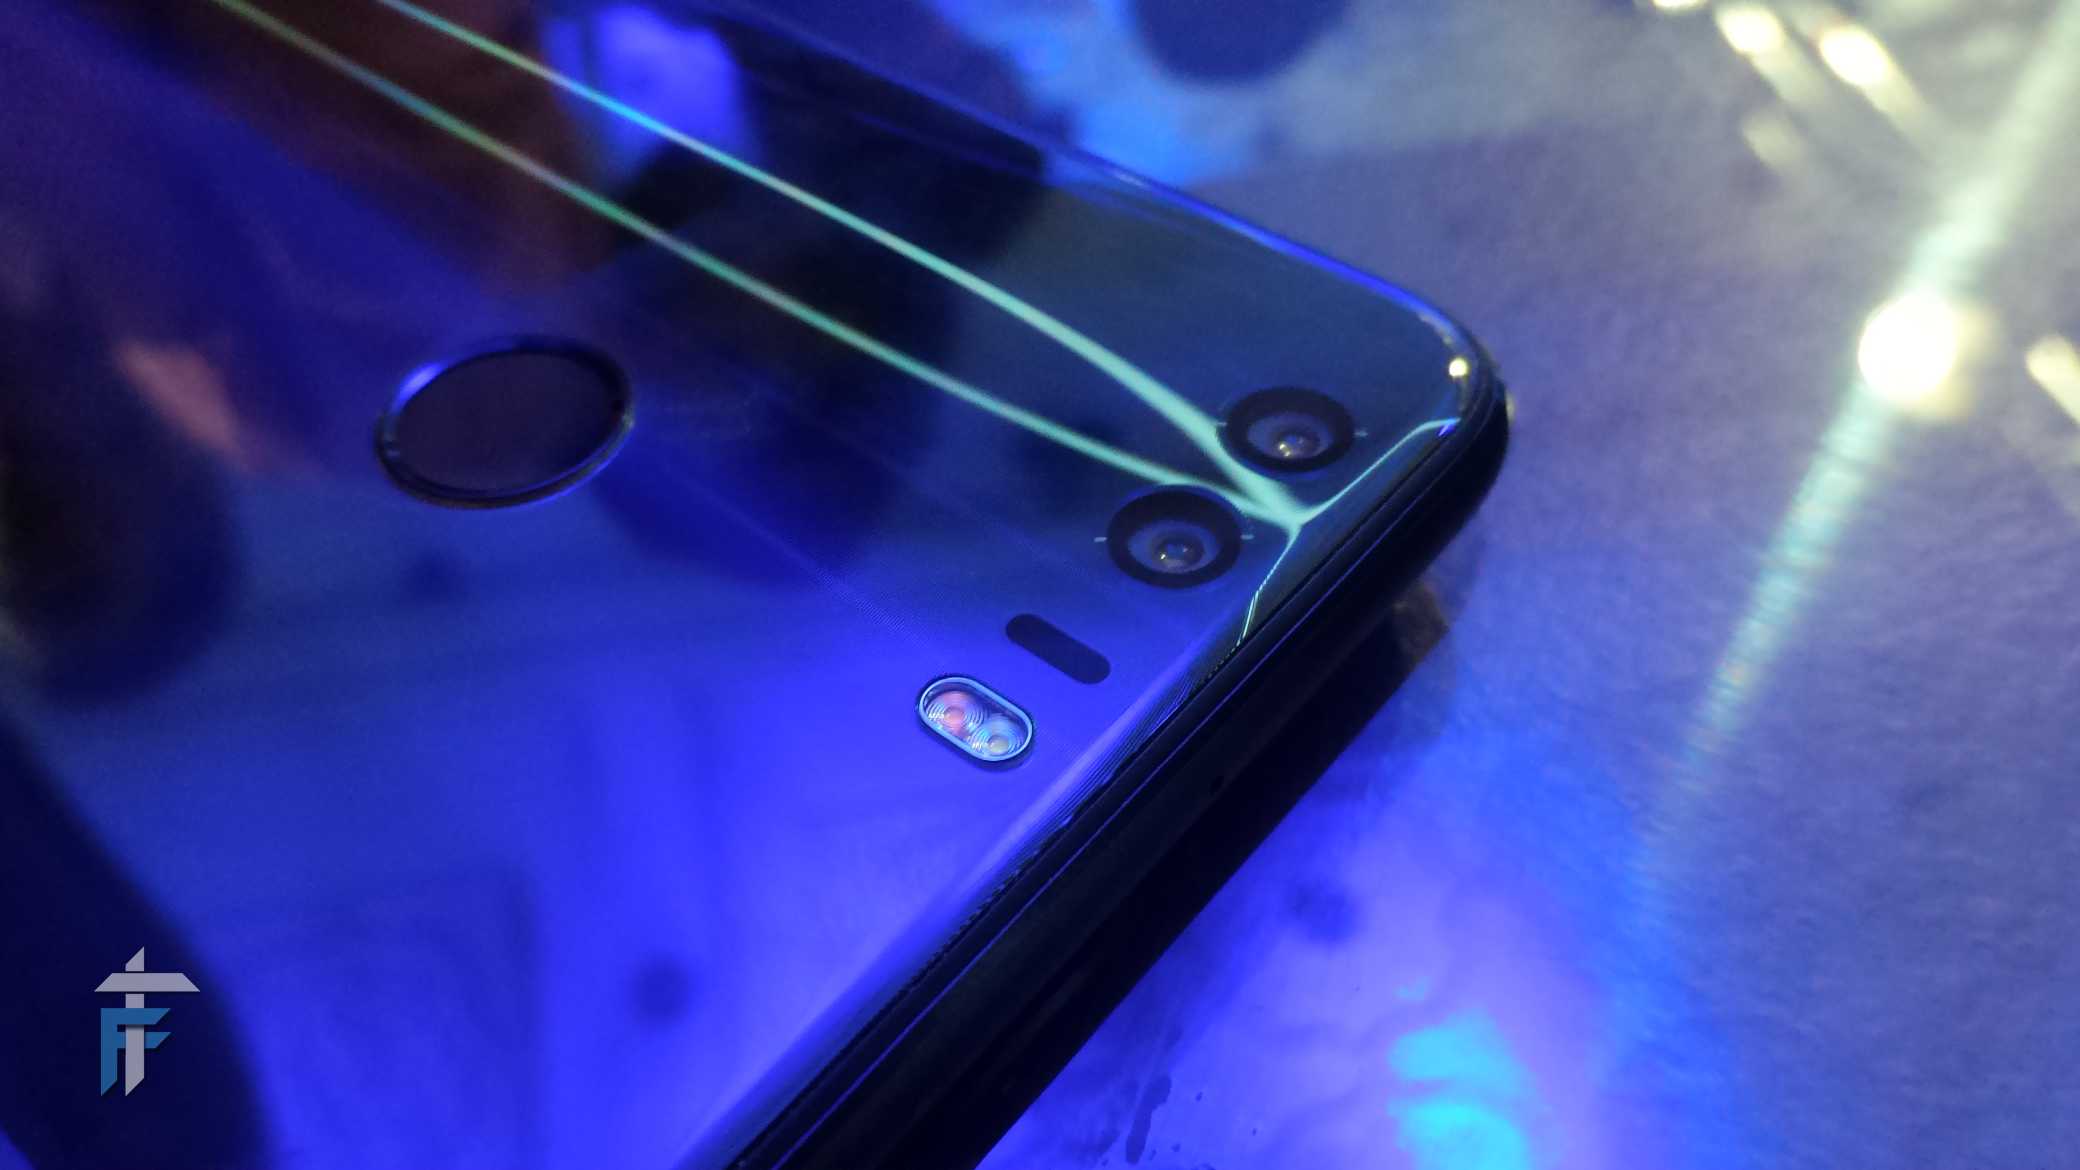 Honor 8 launched with Honor 8 smart & Holly 3 in India